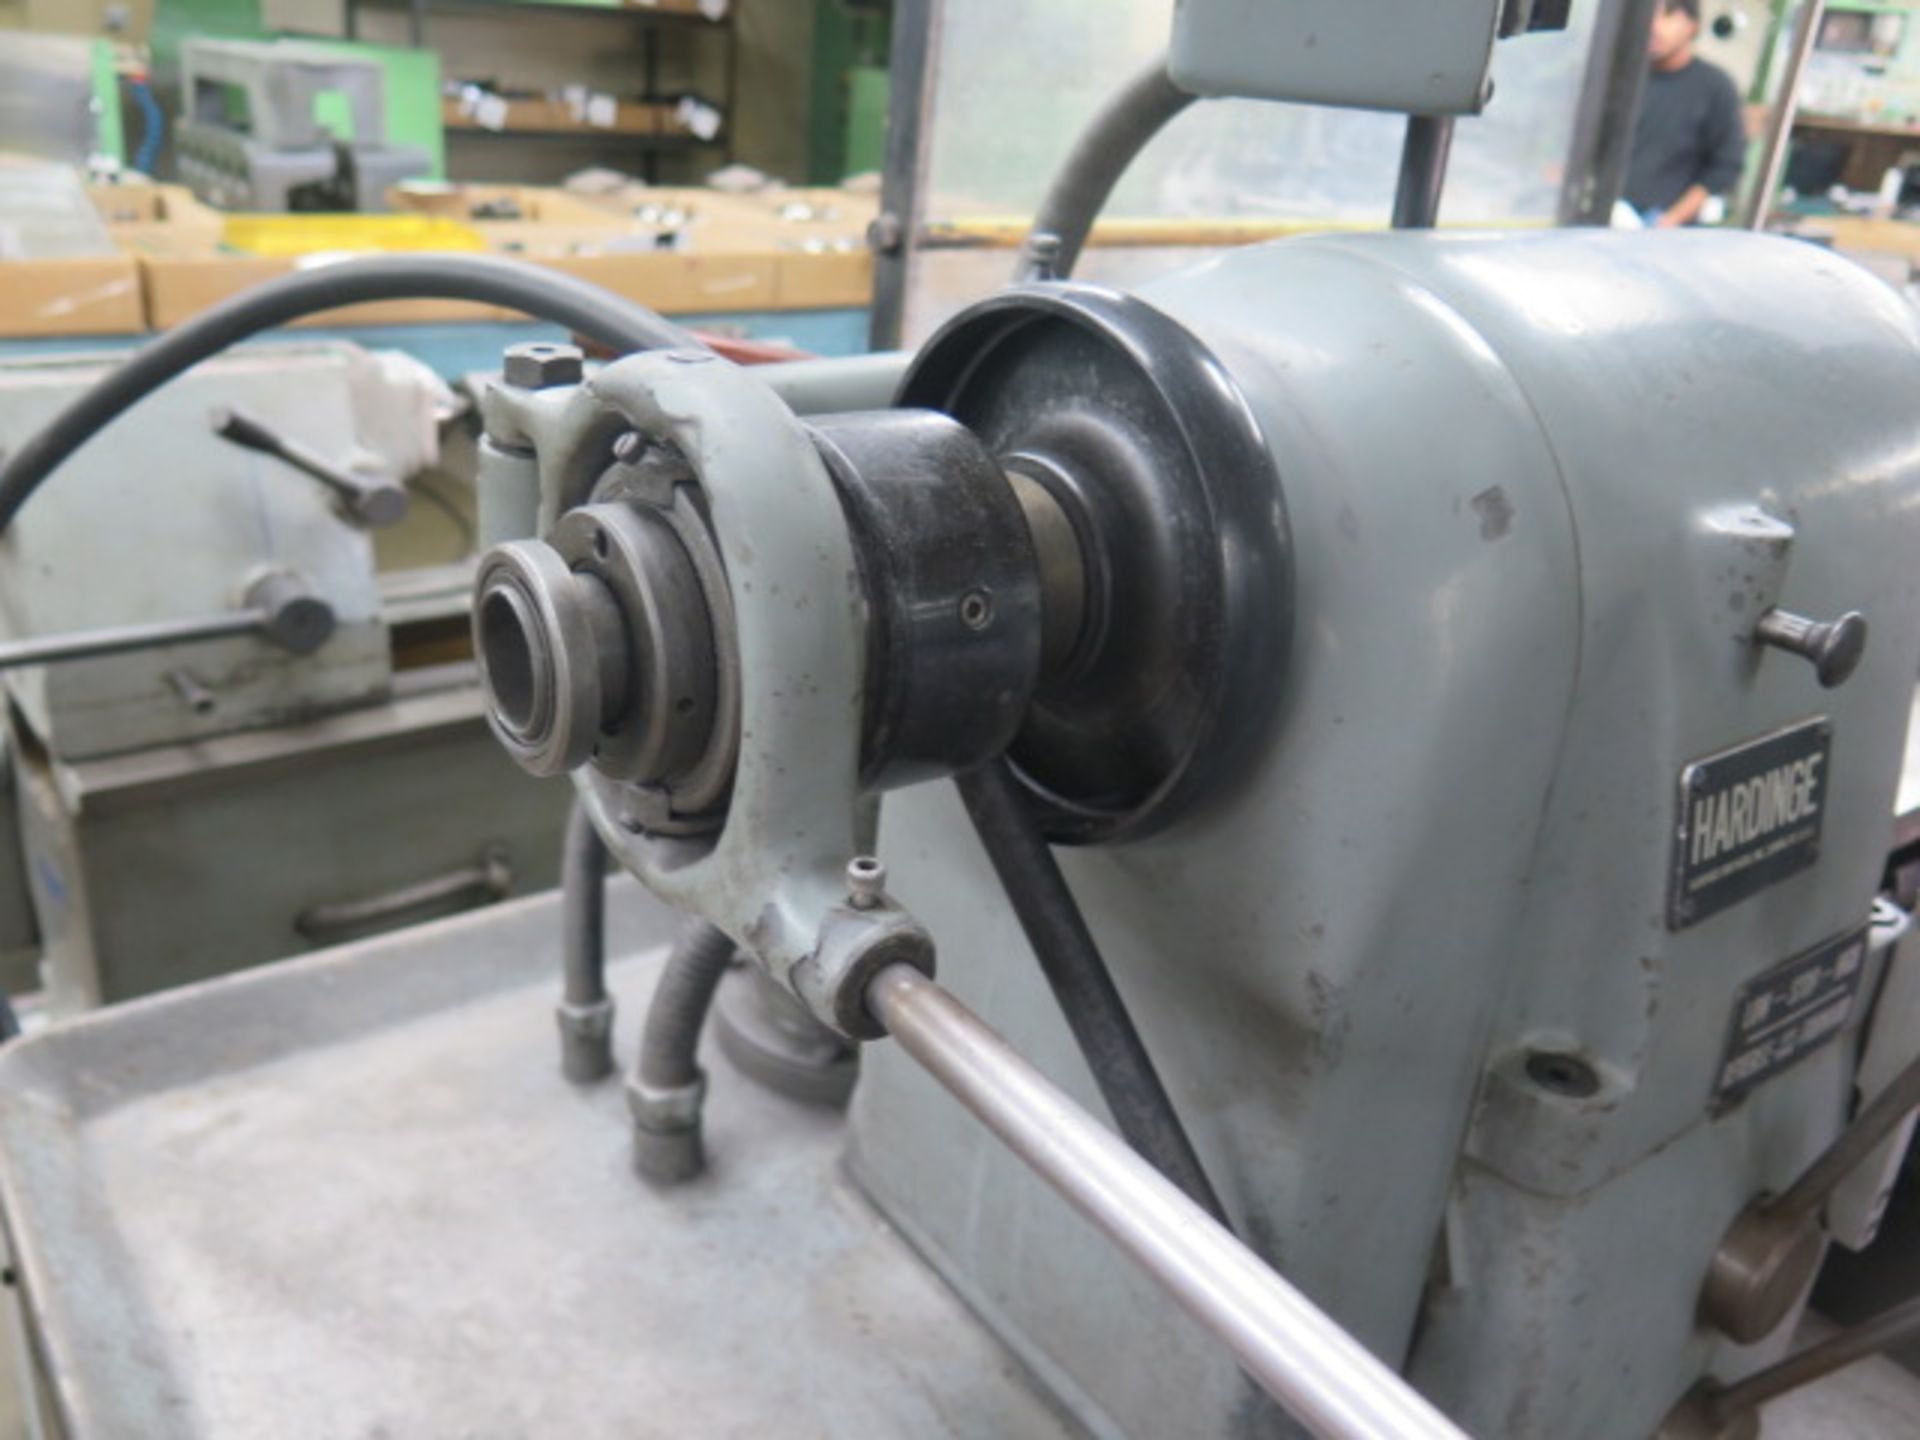 Hardinge TFB-H Wide Bed Second OP Lathe w/ 125-3000 RPM, Tailstock, Power Feeds, KDK, SOLD AS IS - Image 6 of 13